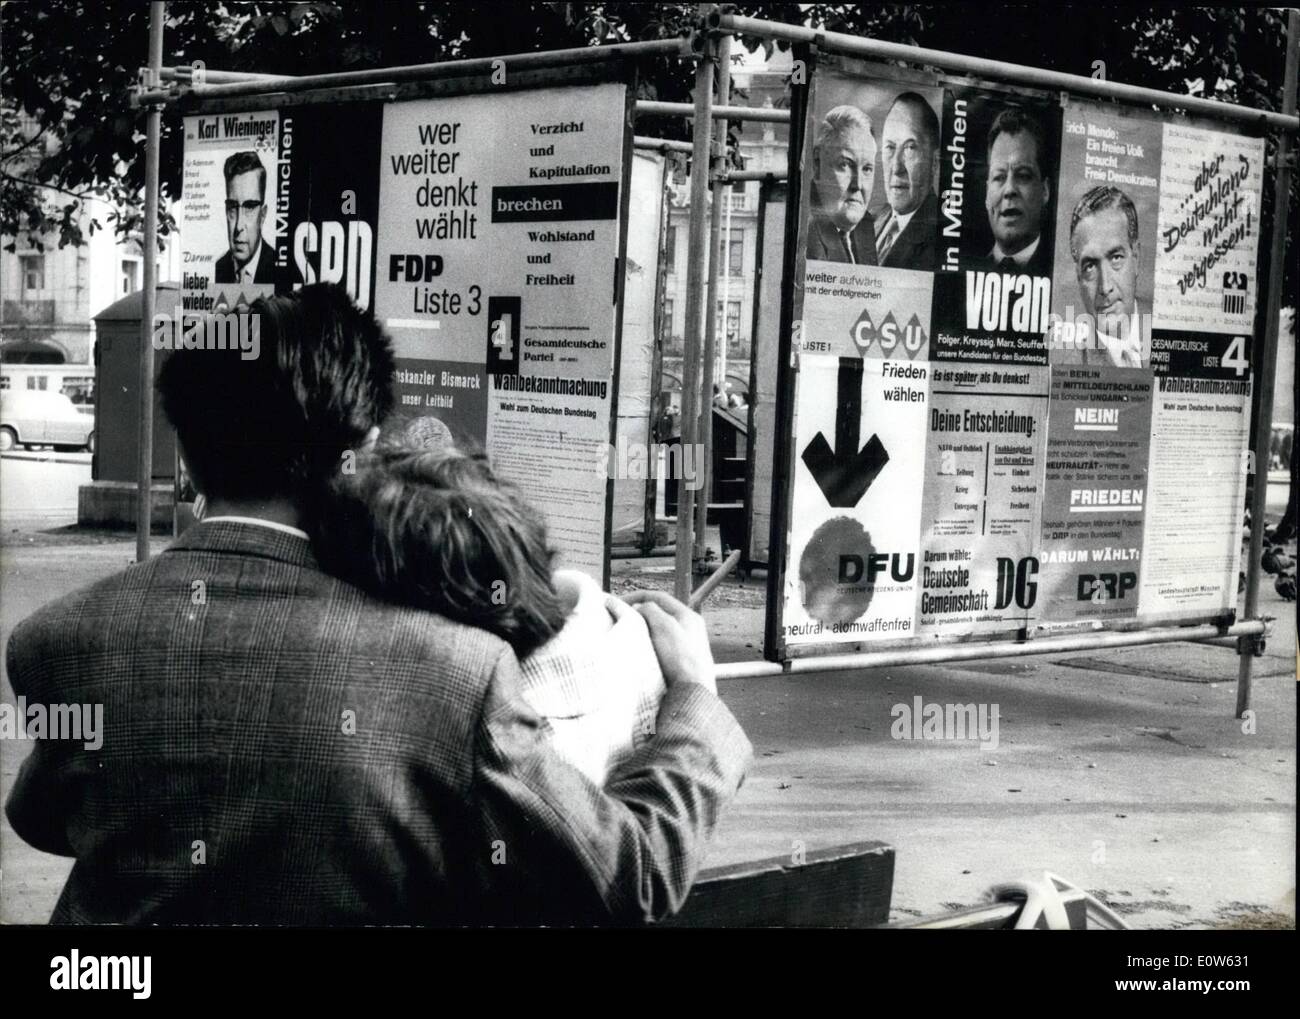 Sep. 09, 1961 - They are talking about love. and dreaming of a happy future - like all the couples in love. Probably they do not look at the election posters opposite to them even if the election is most important for their joint future and for everybody else, too. Stock Photo